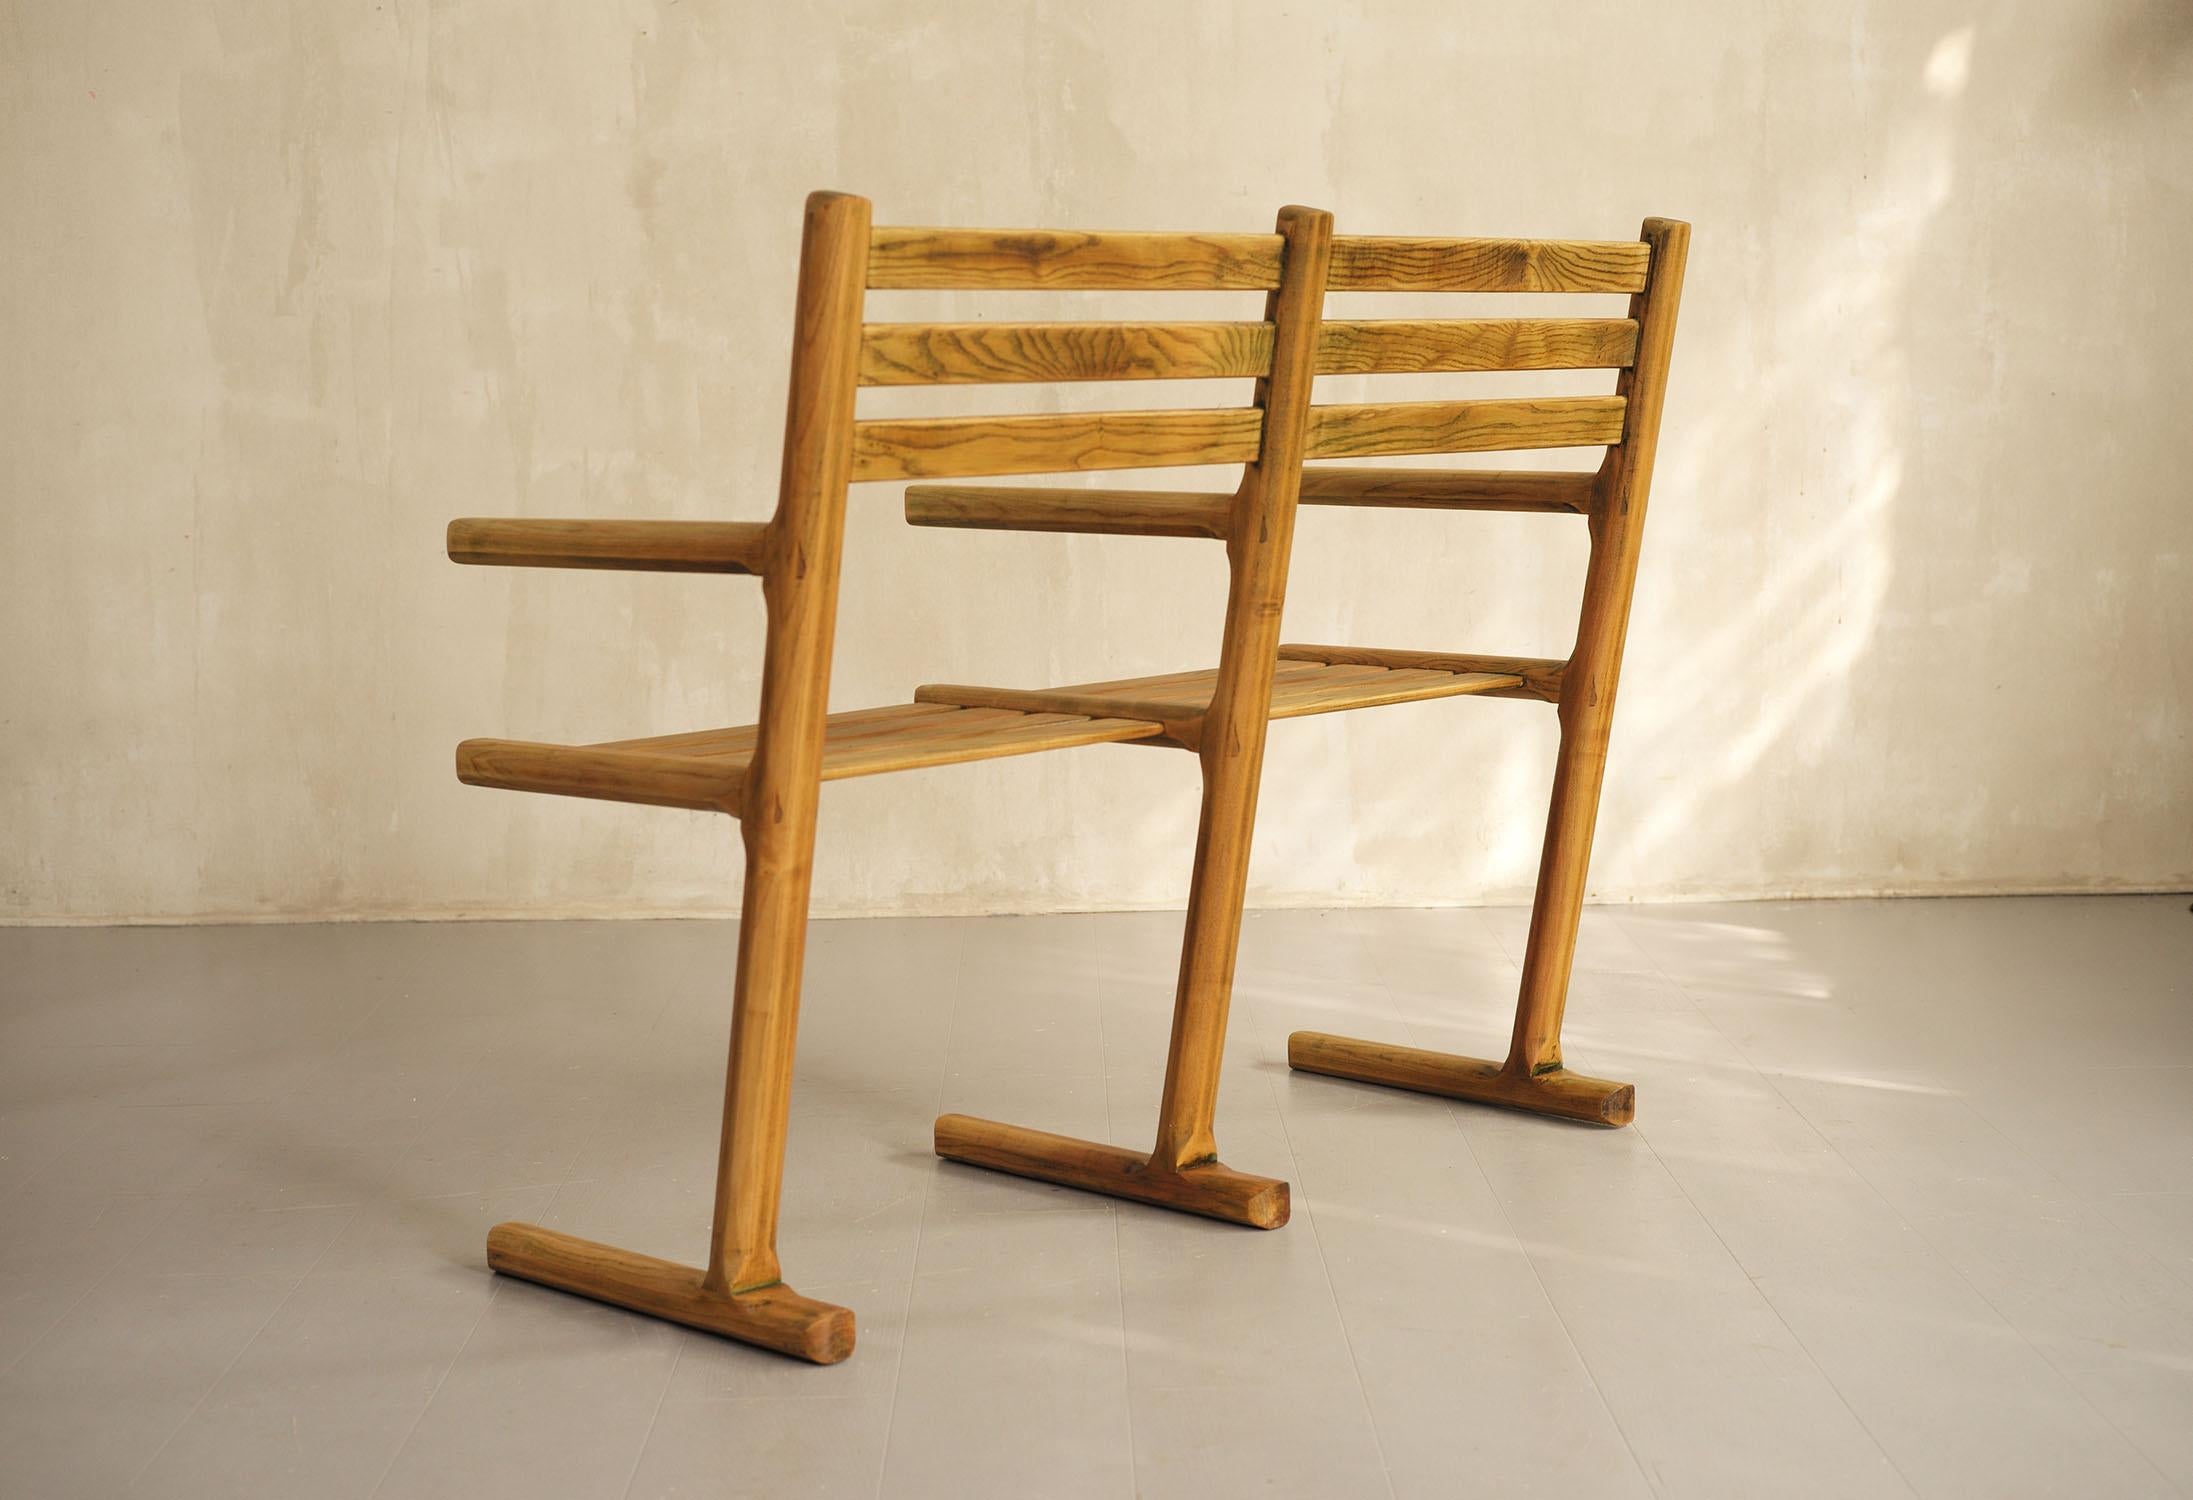 Set of 4 Chairs and 1 Wooden Bench, France, 1960 For Sale 2